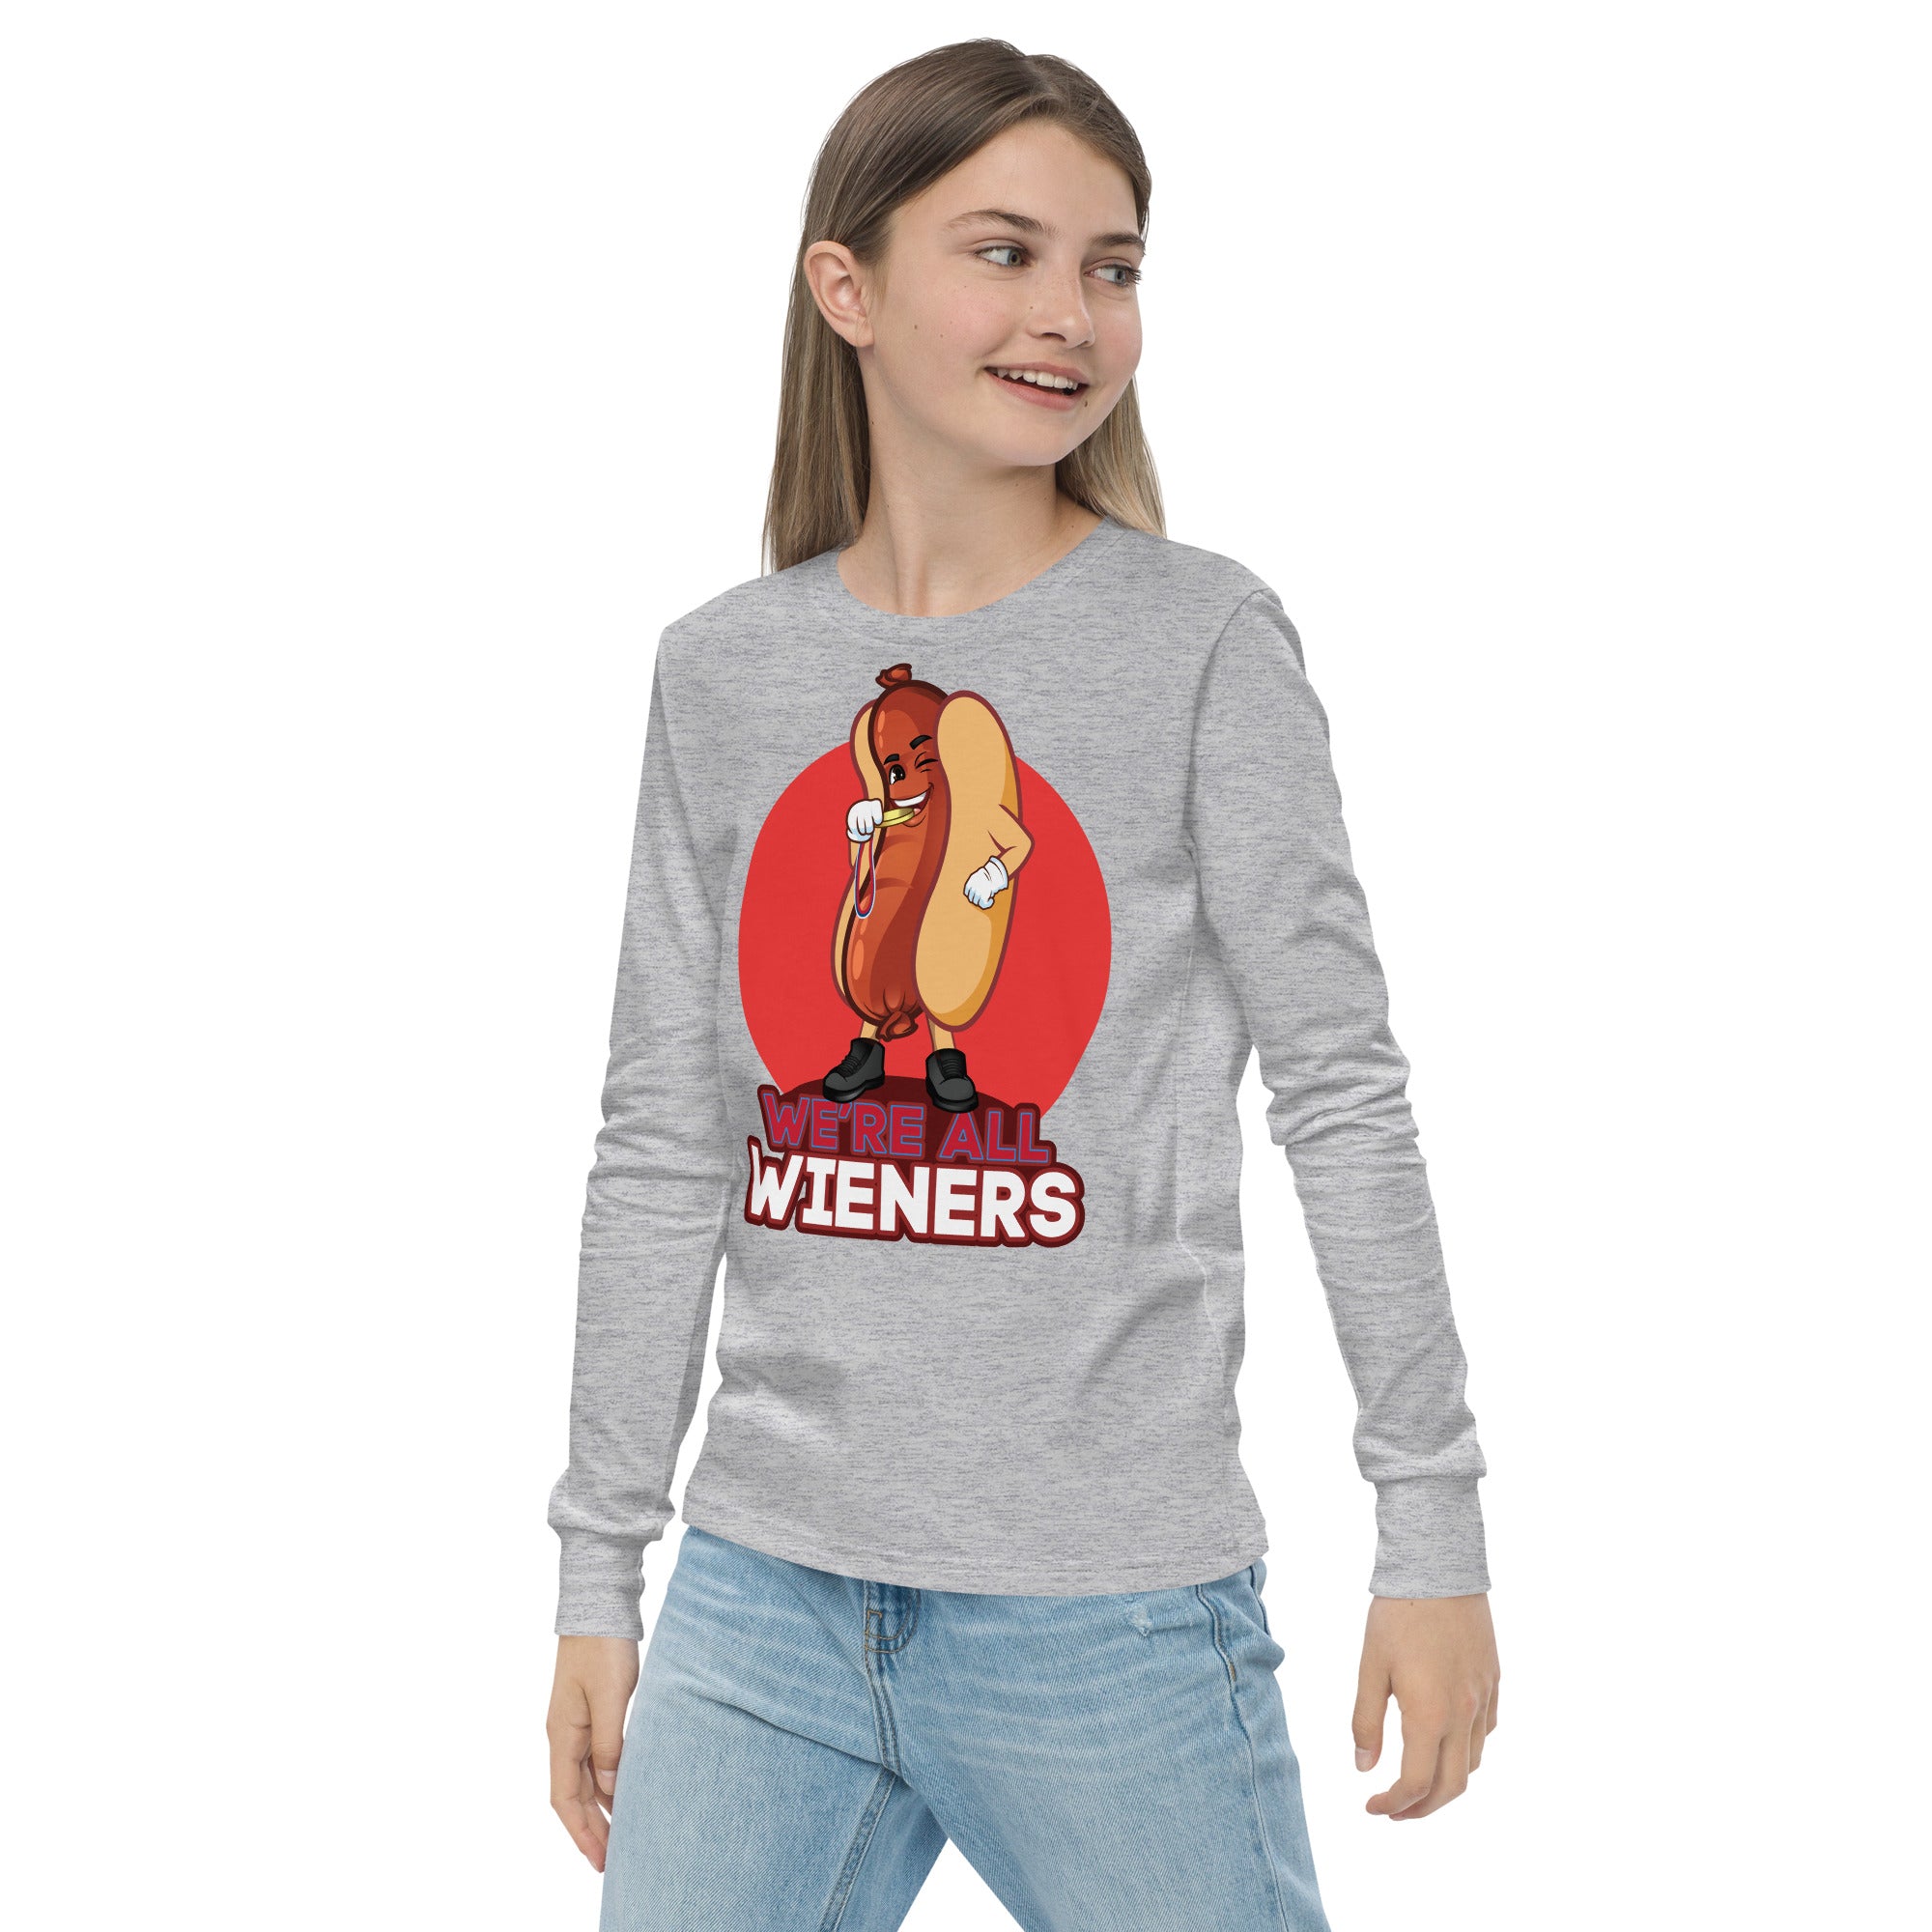 We're All Wieners - Youth Long Sleeve Tee - Red